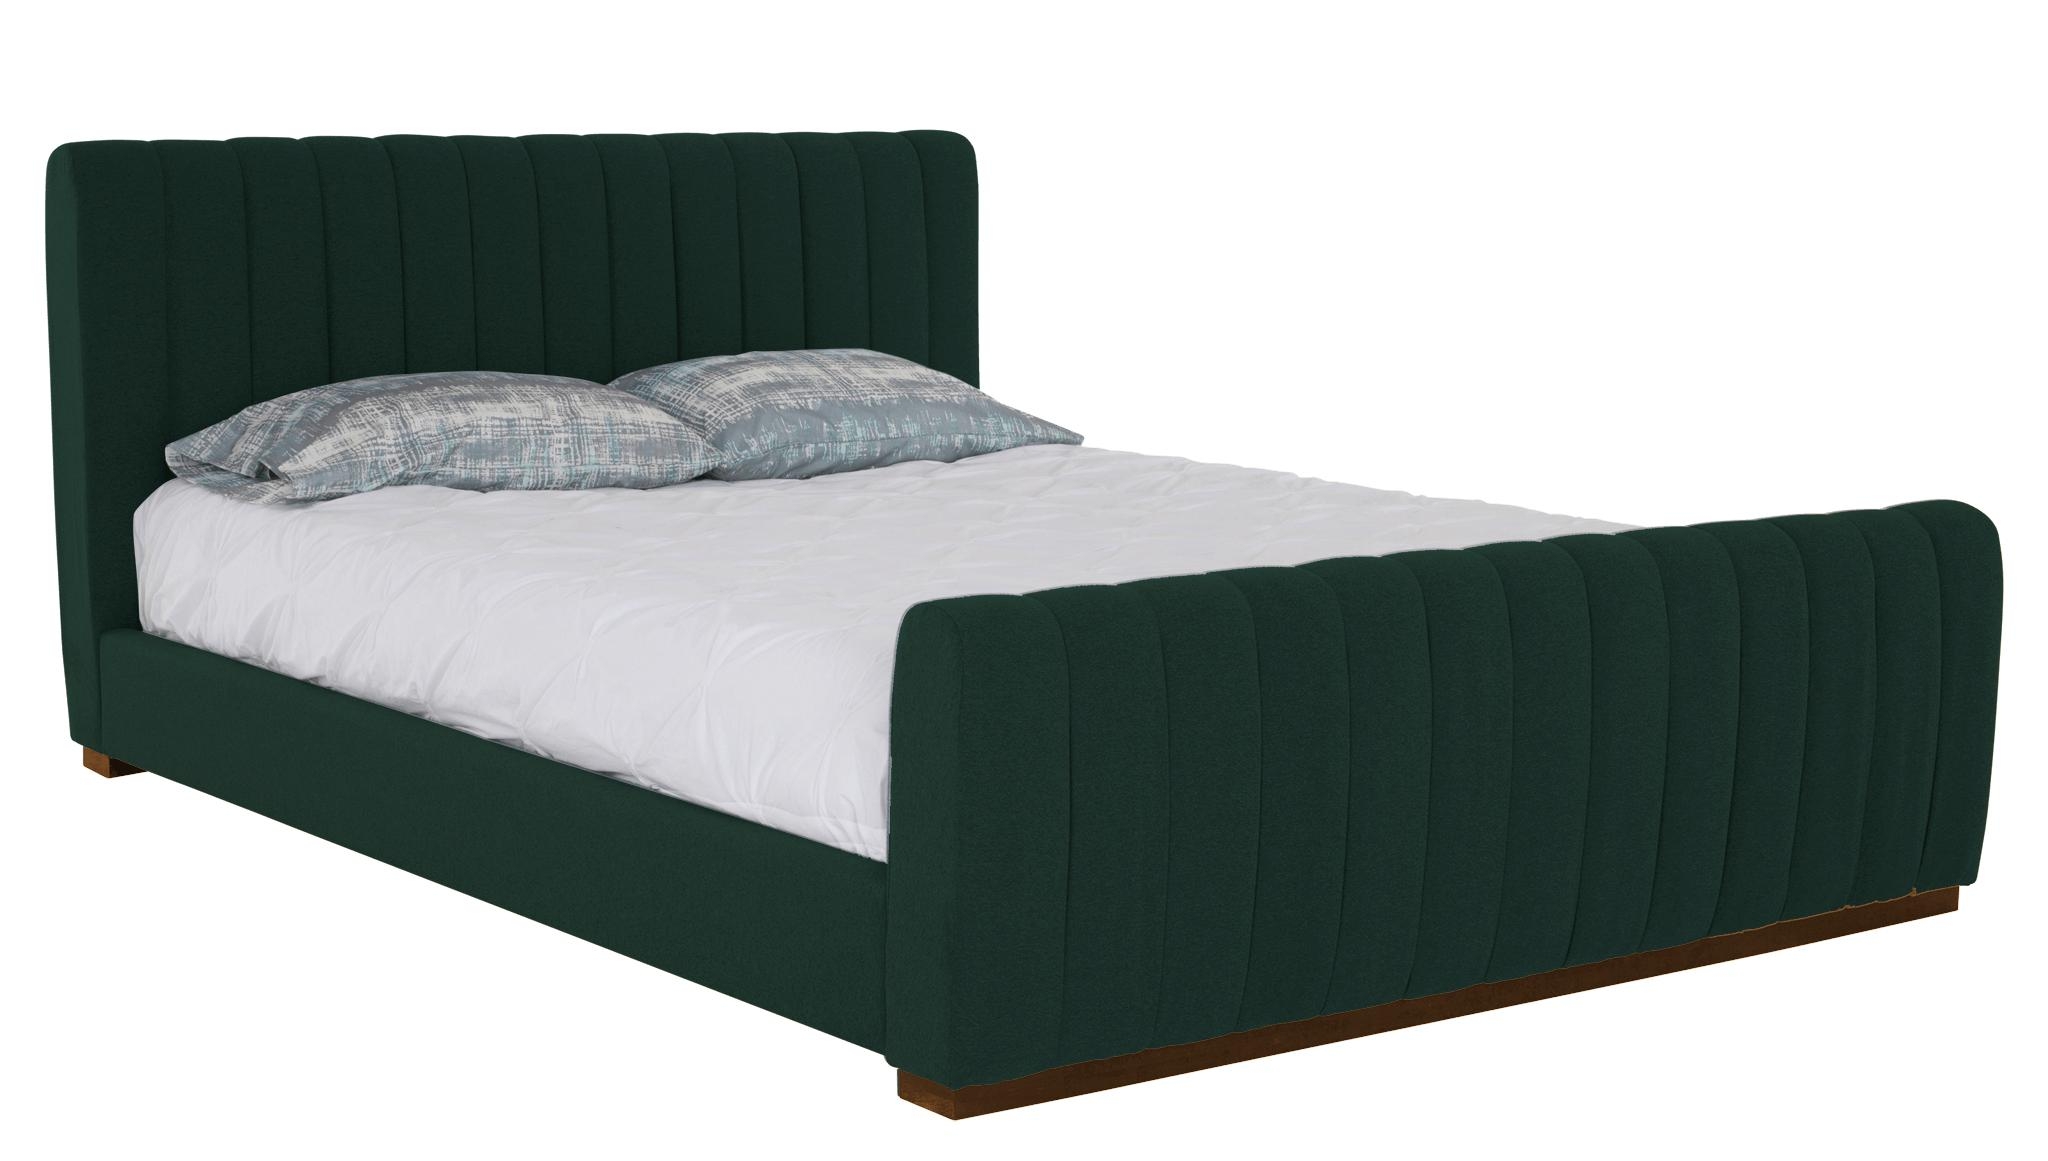 Green Camille Mid Century Modern Bed - Royale Evergreen - Mocha - Eastern King - Image 1